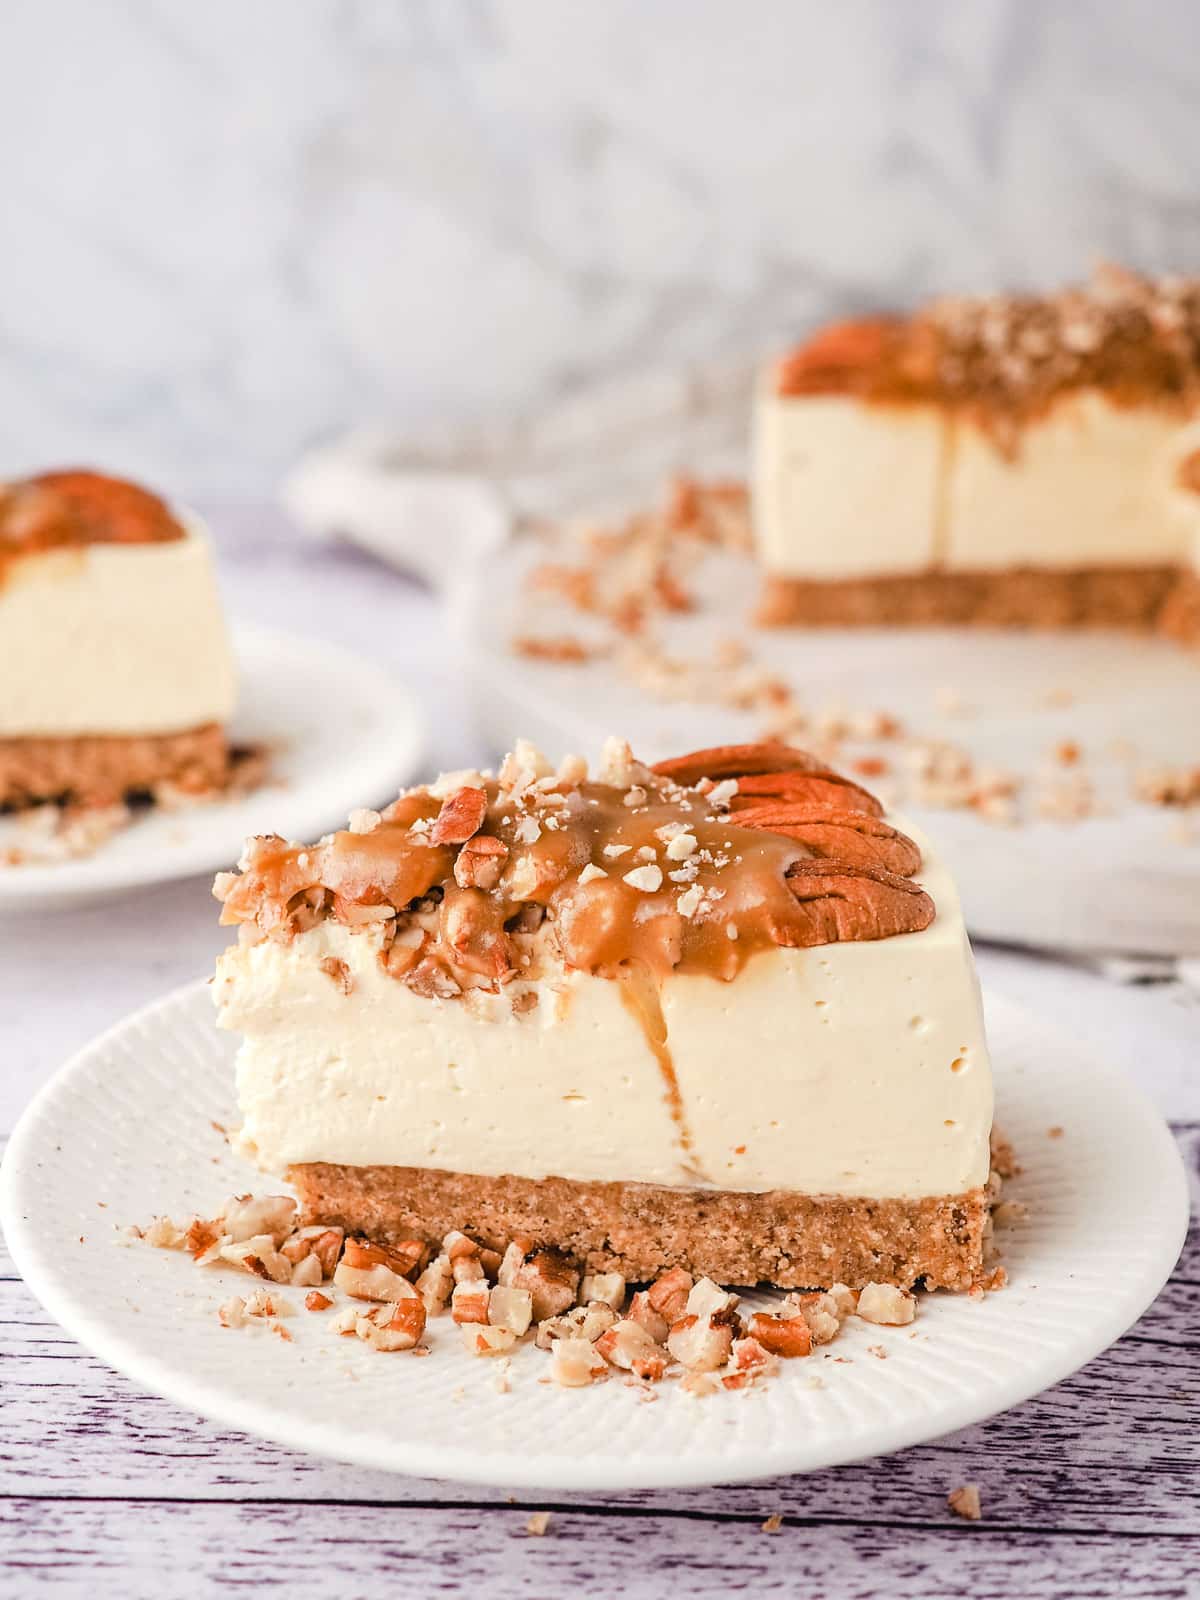 Slice of caramel pecan cheesecake on a place, with rest of cheesecake and another slice in the background.